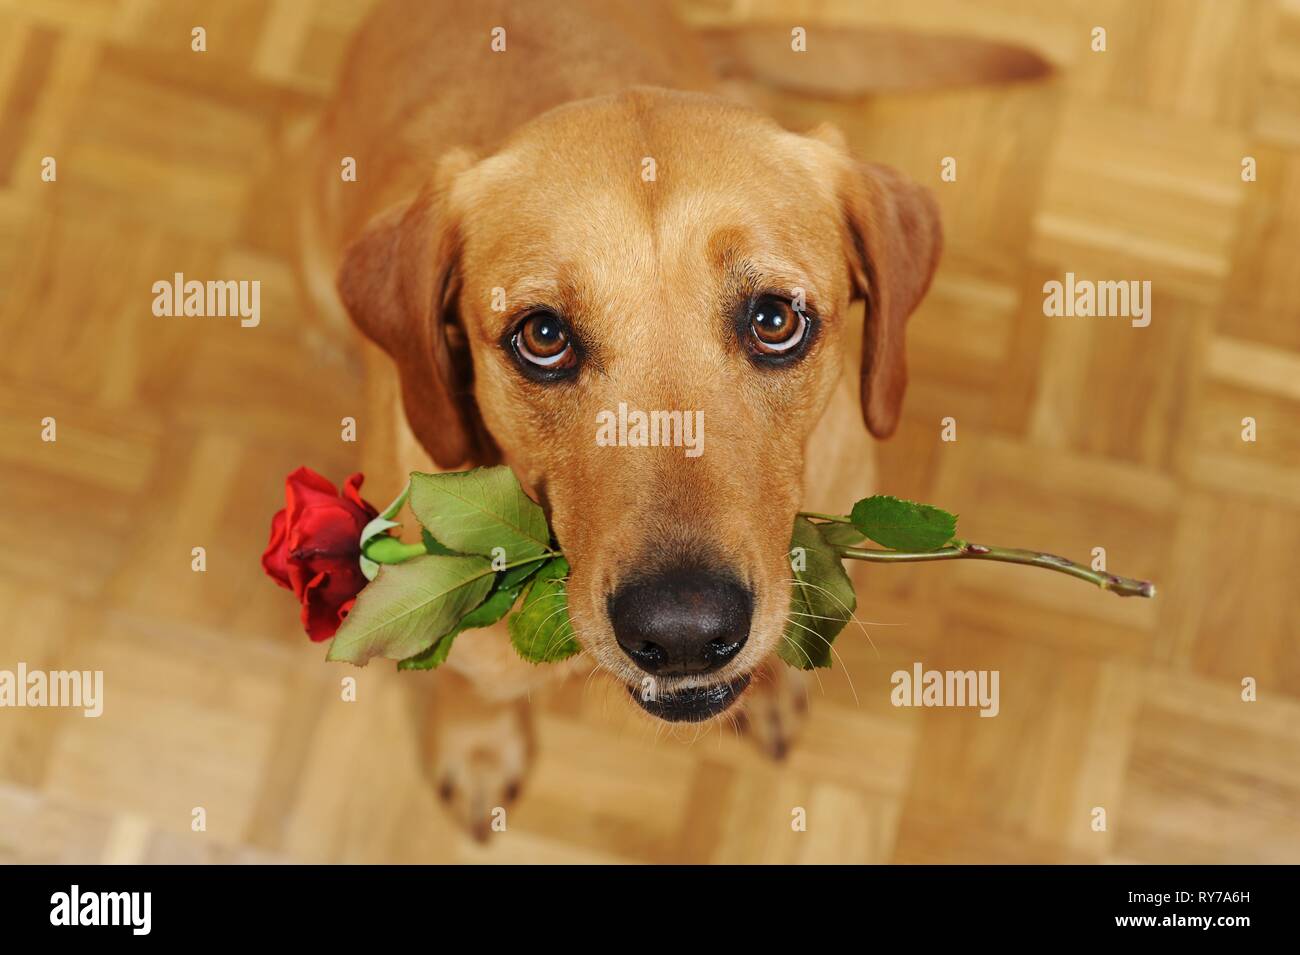 Labrador Retriever, yellow, bitch, view from above, holds red rose in mouth, faithful view, Austria Stock Photo